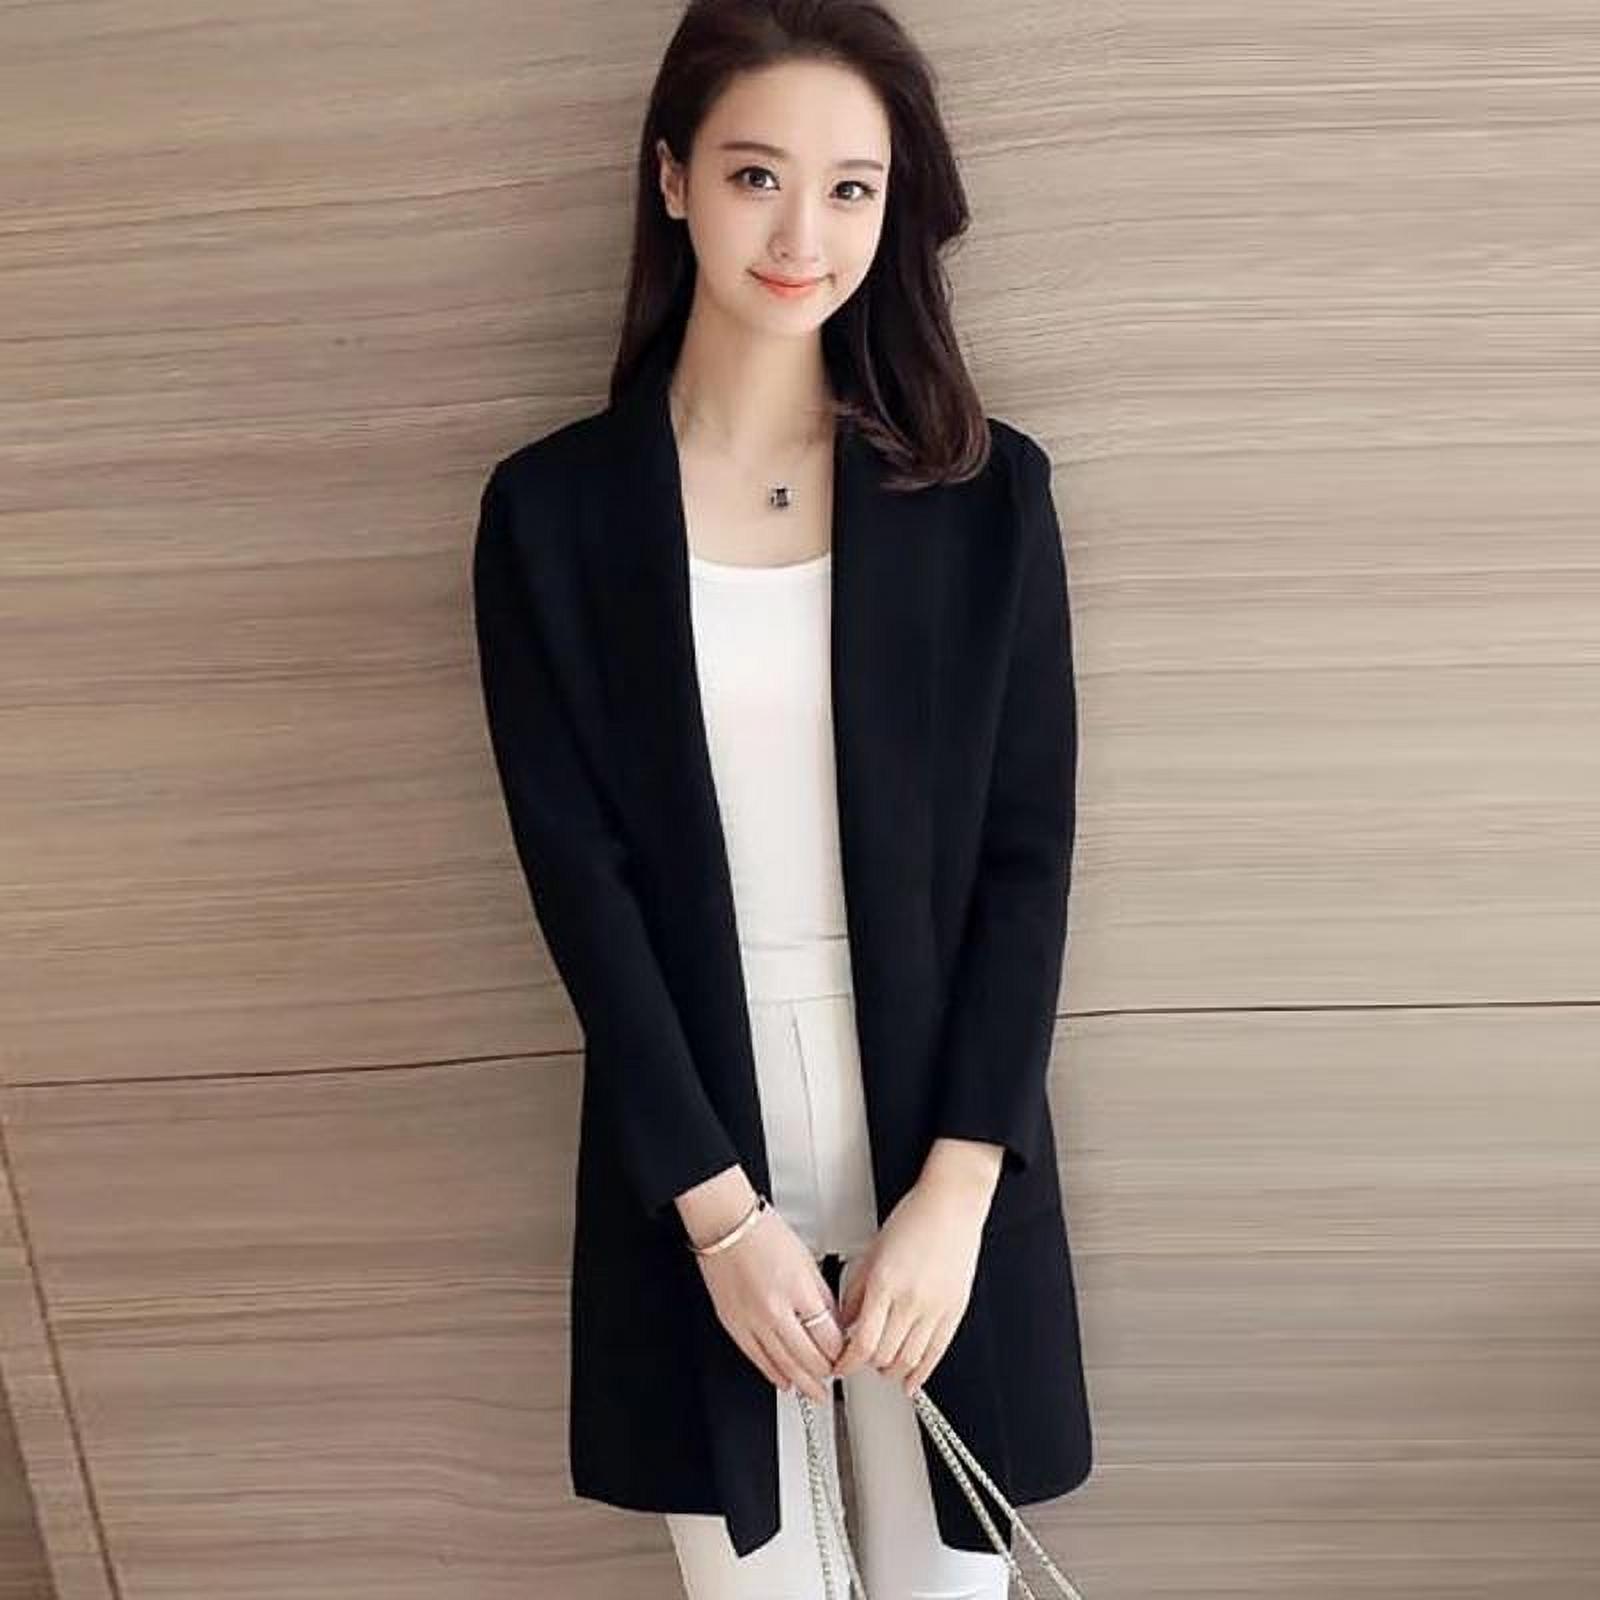 JANDEL Korean Style Loose Casual Solid Color Knit Cardigan Fashion Trend Long-sleeved Women's Coat, Women's Jacket, Long Coat - image 1 of 5